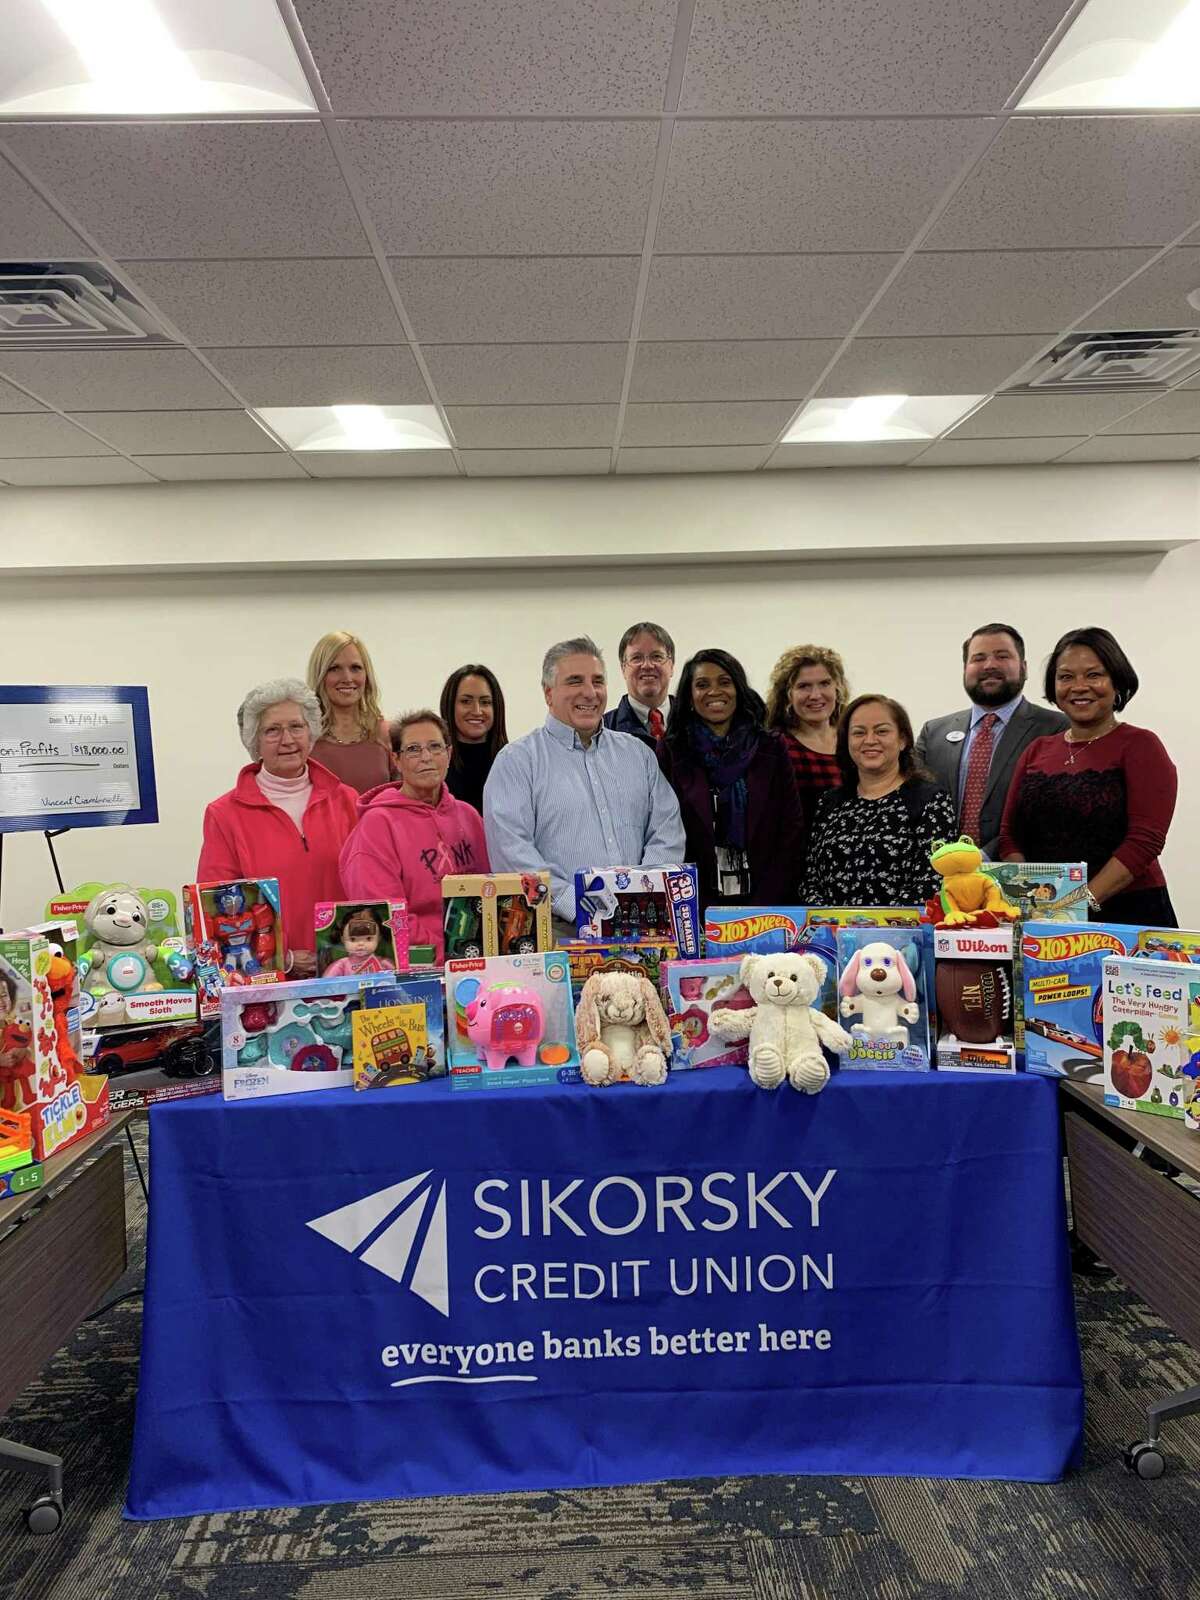 Sikorsky Credit Union collected more than 120 toys for childrenin the area for the holiday season.